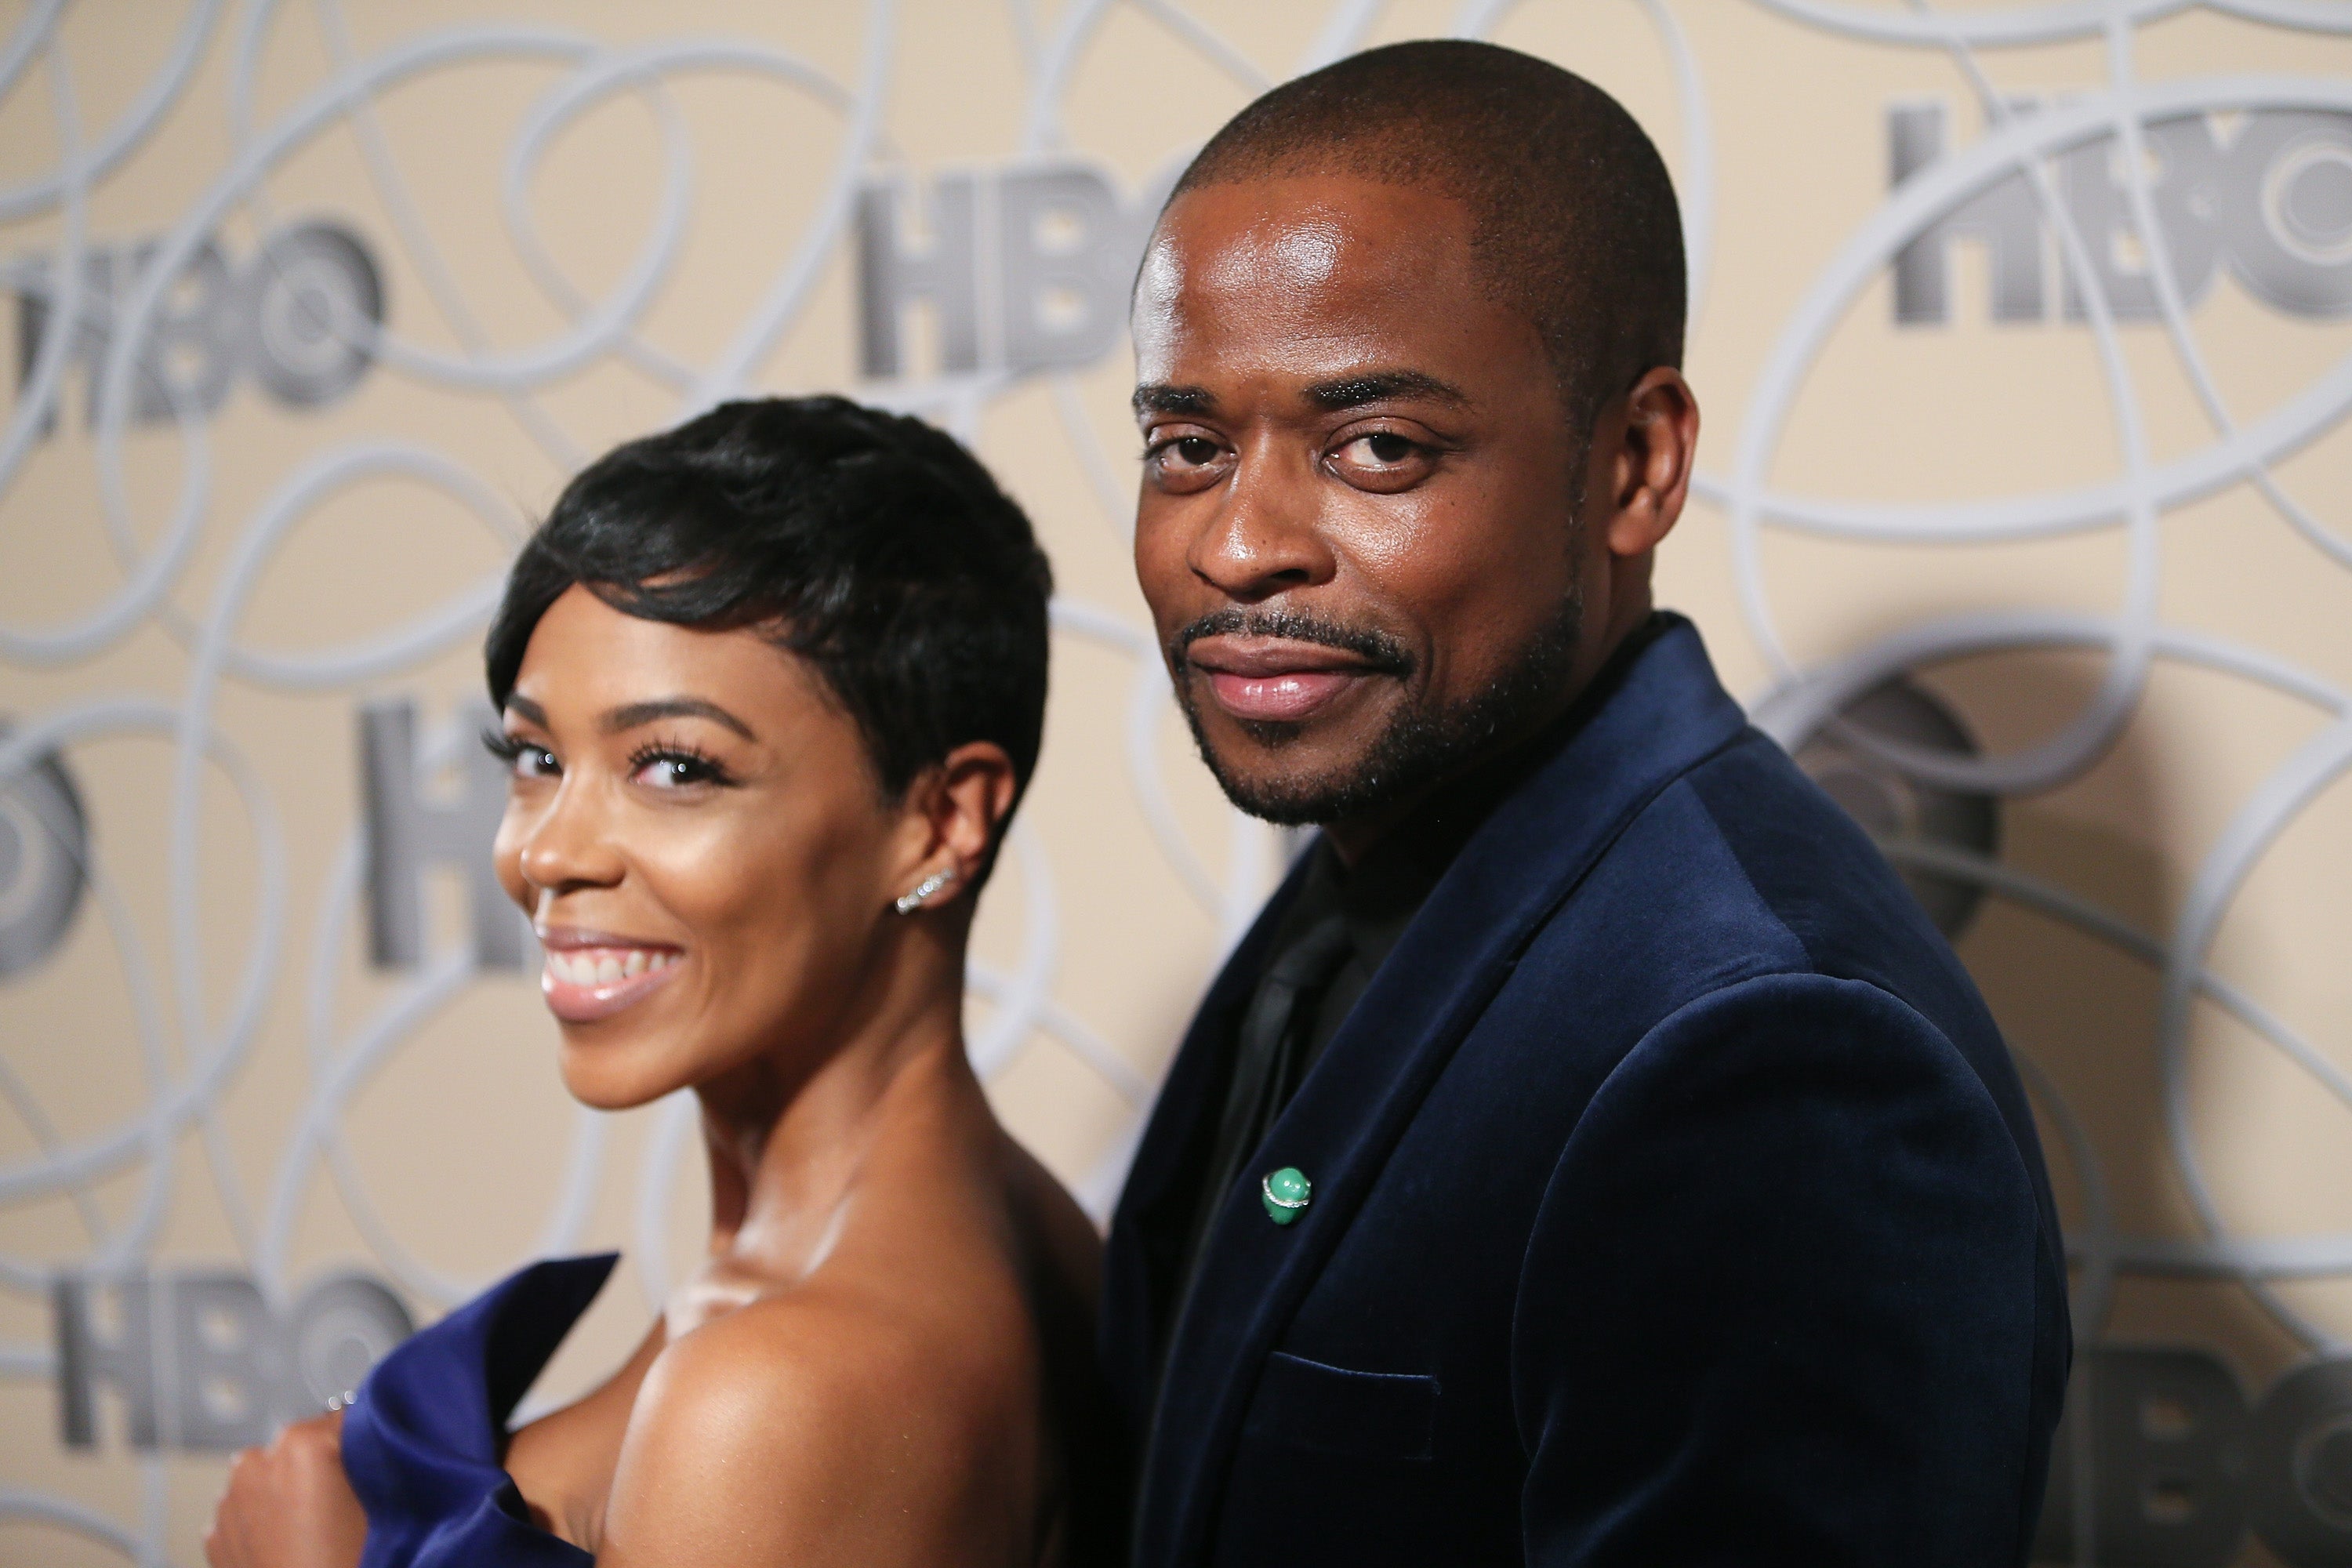 ‘West Wing’ Star Dulé Hill And ‘Ballers’ Actress Jazmyn Simon Are Engaged!